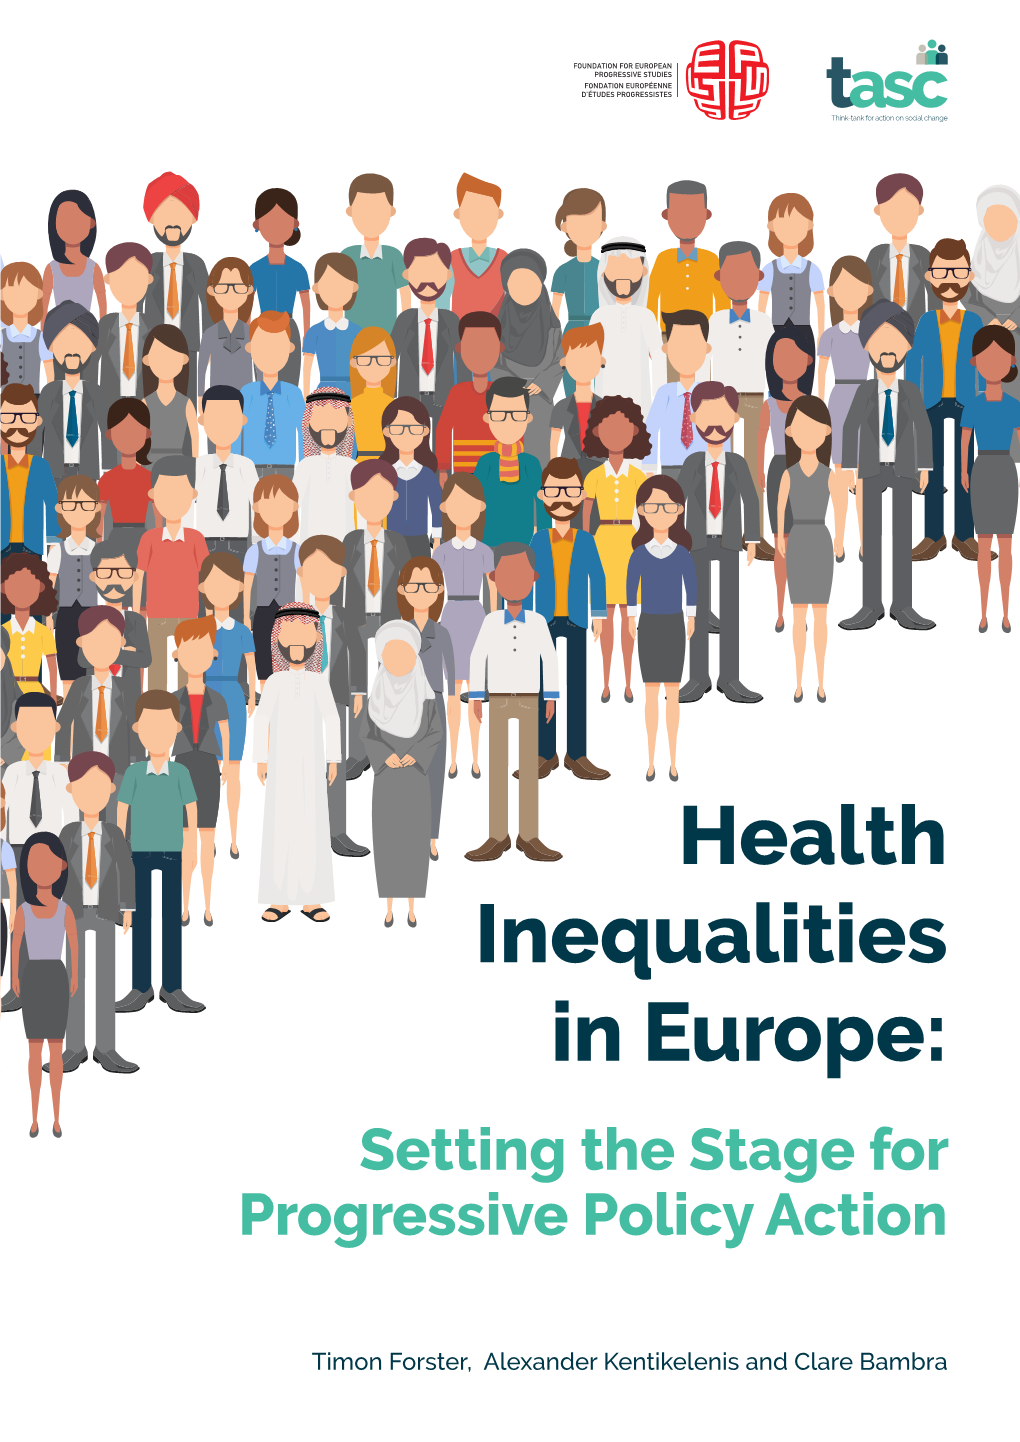 Health Inequalities in Europe: Setting the Stage for Progressive Policy Action